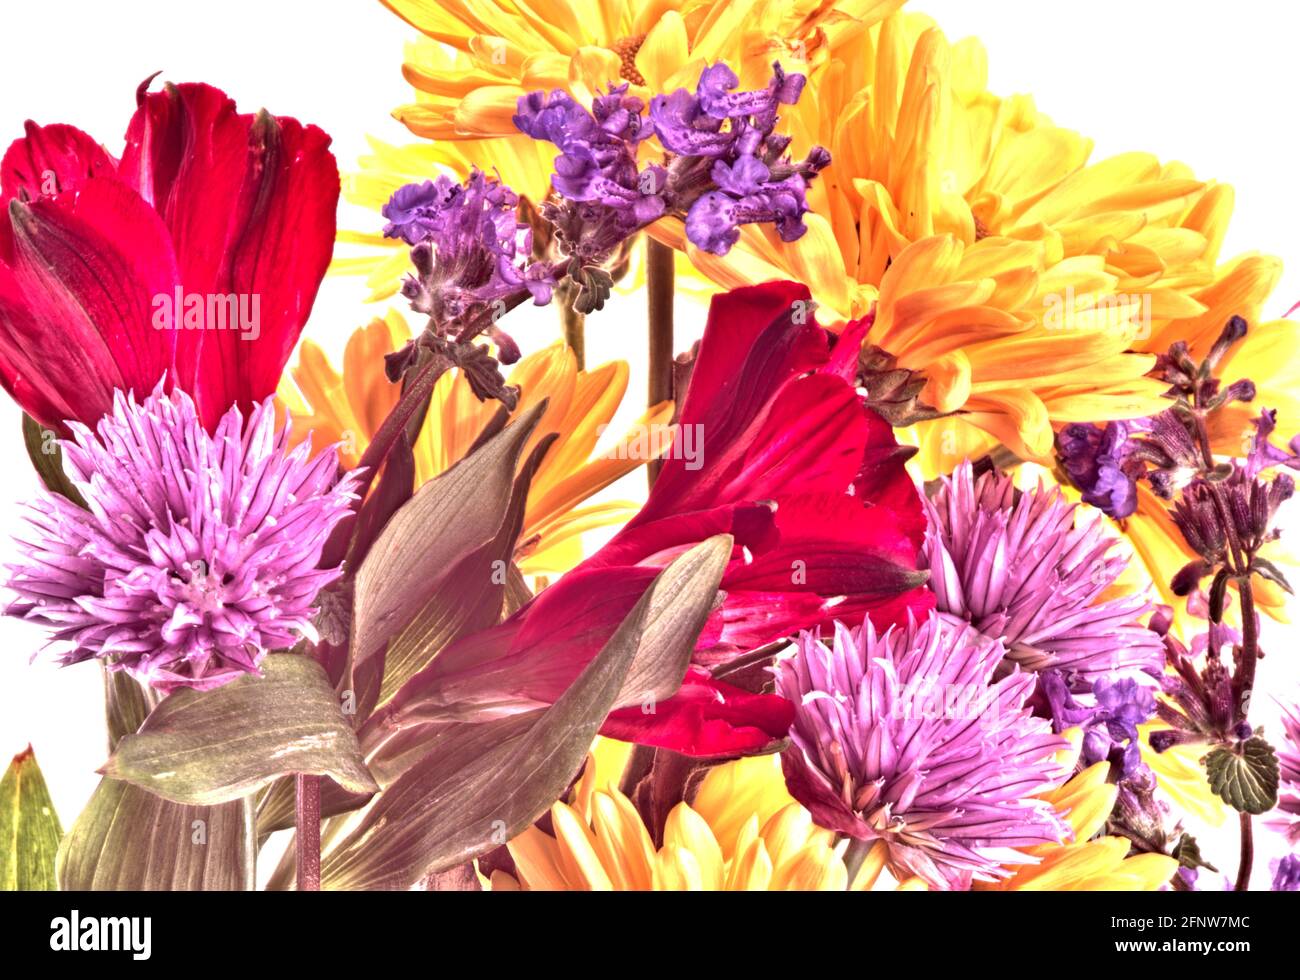 A high dynamic range (HDR) image of a bouquet of red purple and yellow flowers isolated on a white background that has a painting-like quality. Stock Photo